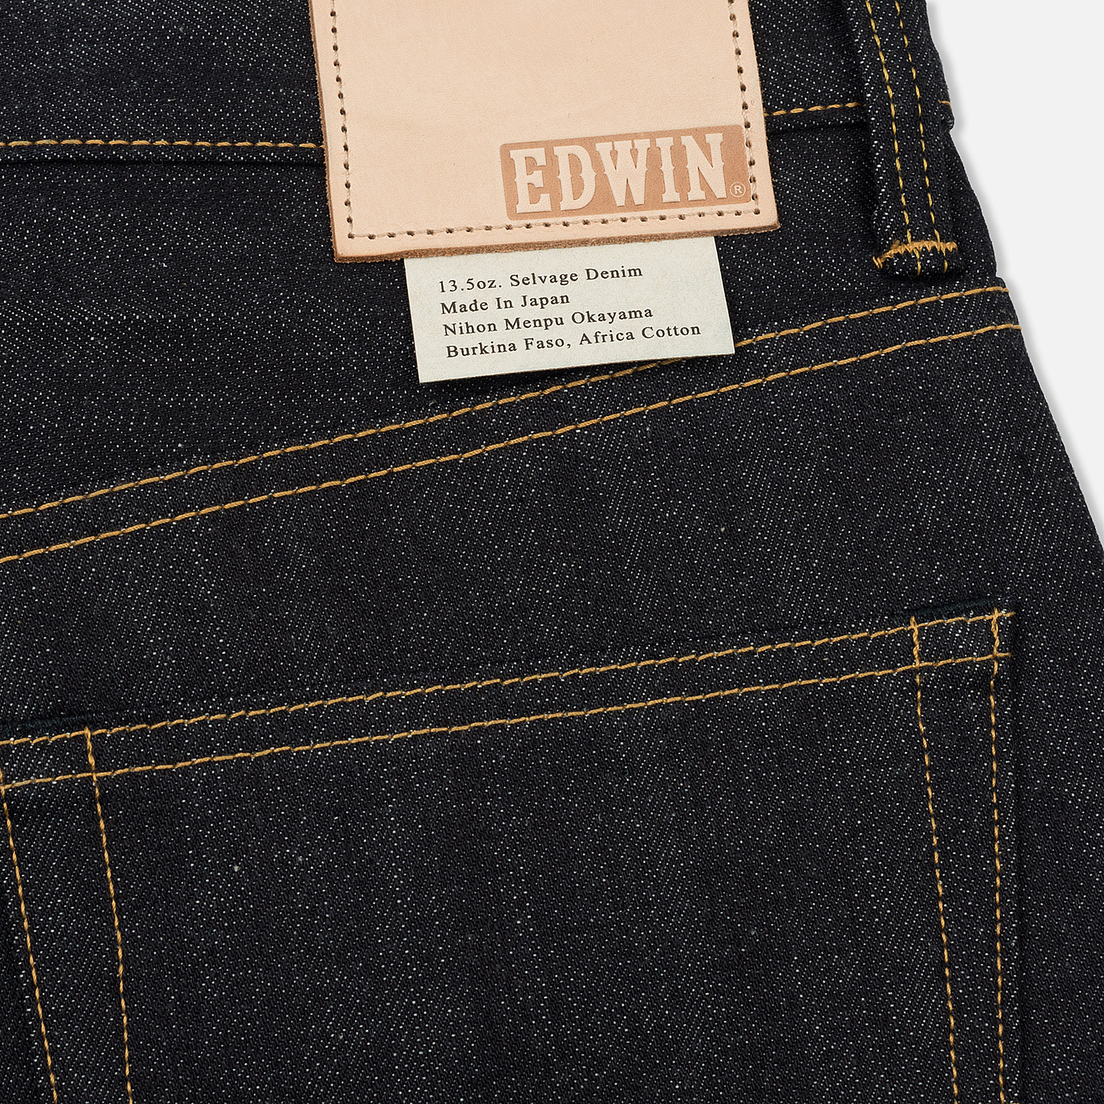 Edwin Мужские джинсы ED-55 Relaxed Tapered Nihon Menph Japan Selvage Stretch